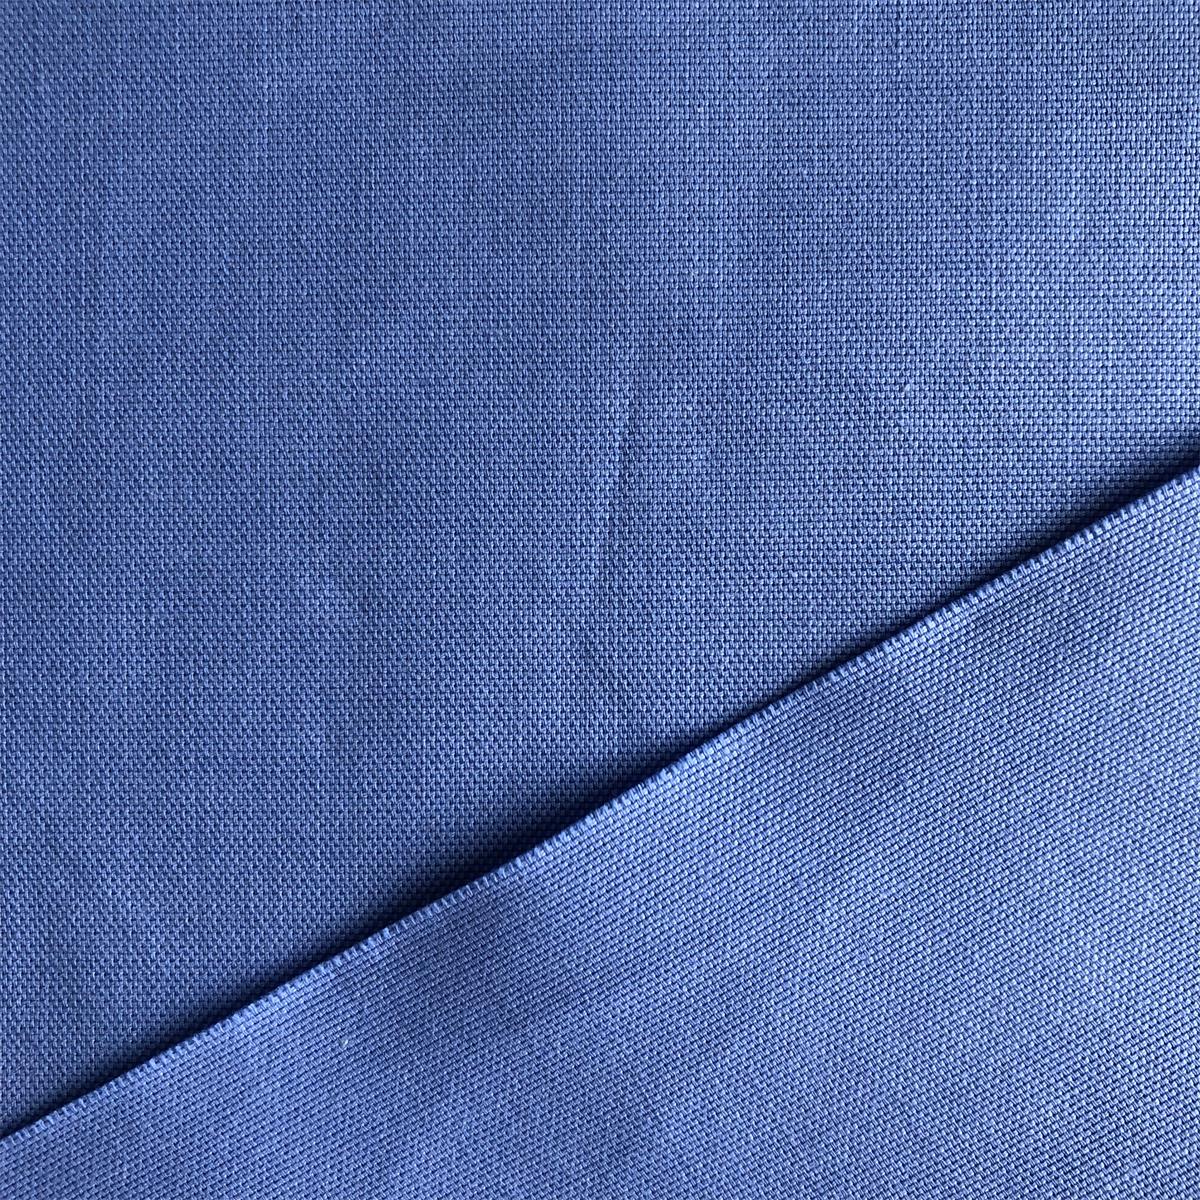 High quality Eco-friendly Yarn Dyed Fabric by compact yarn 100% cotton yarn dyed oxford chambray plain shirts woven fabric